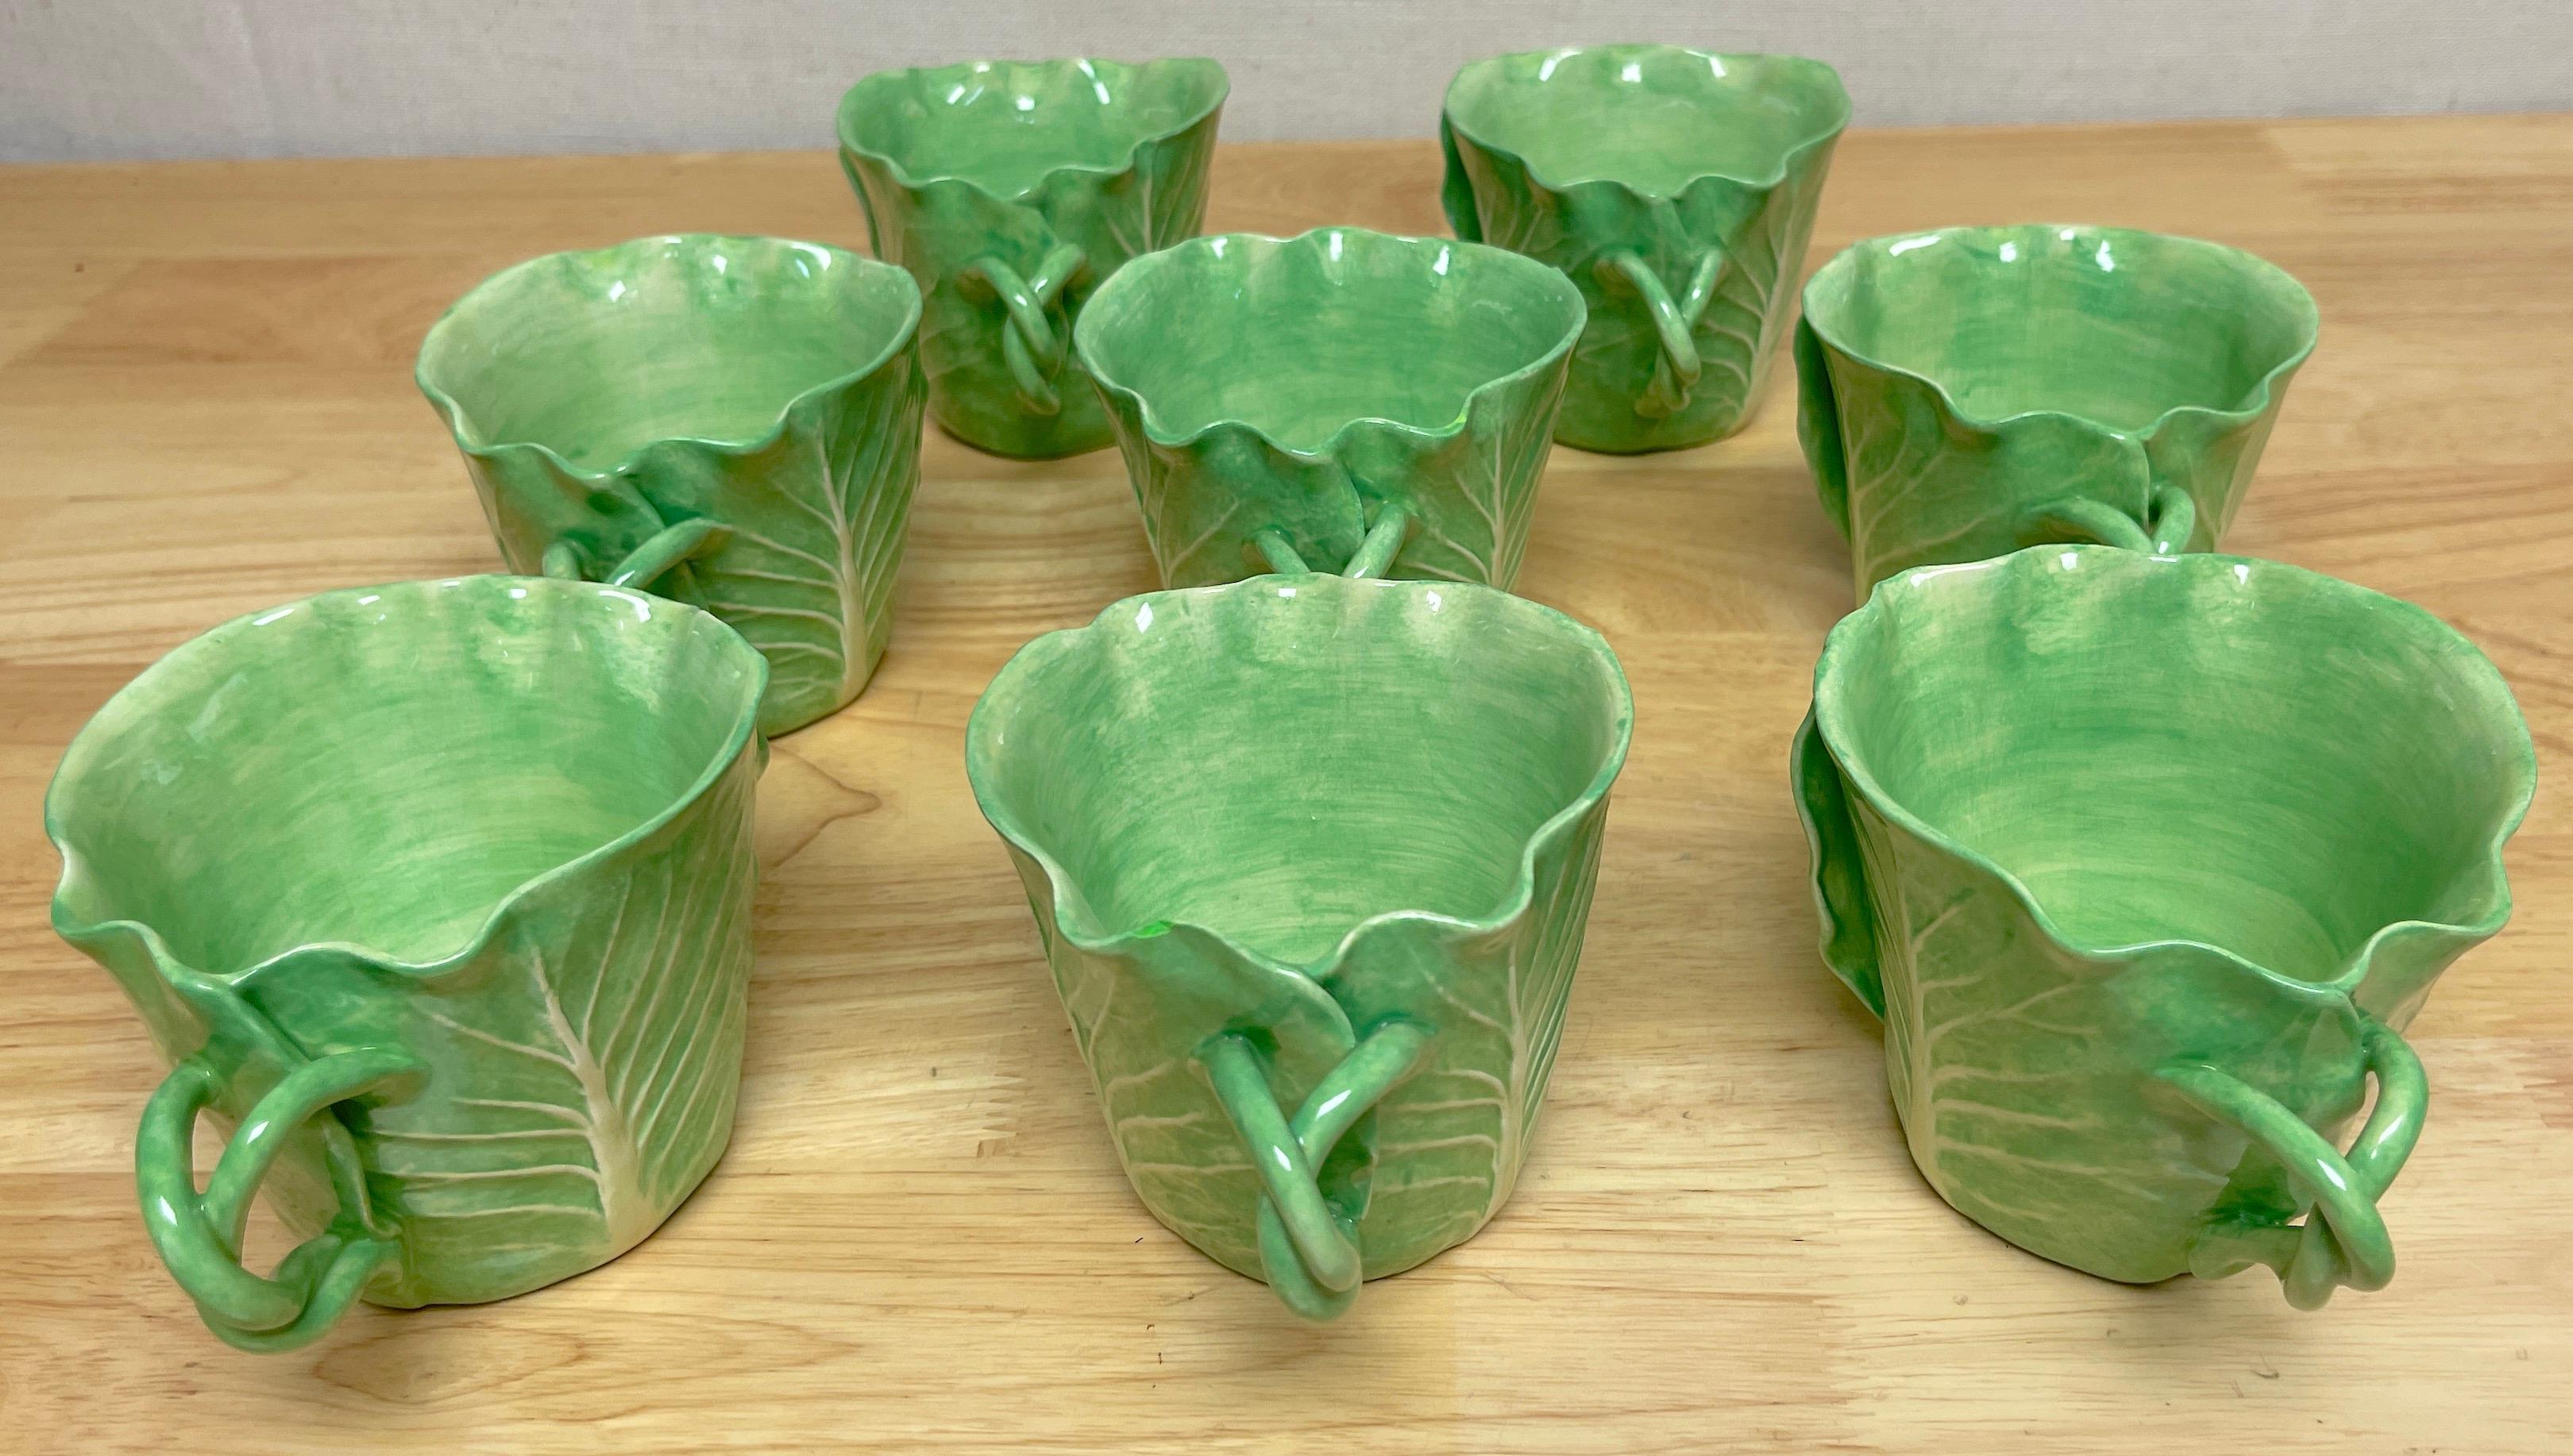 American Dodie Thayer 'Jumbo' Lettuce Leaf Cup & Saucer, 5 Available, Sold Individually